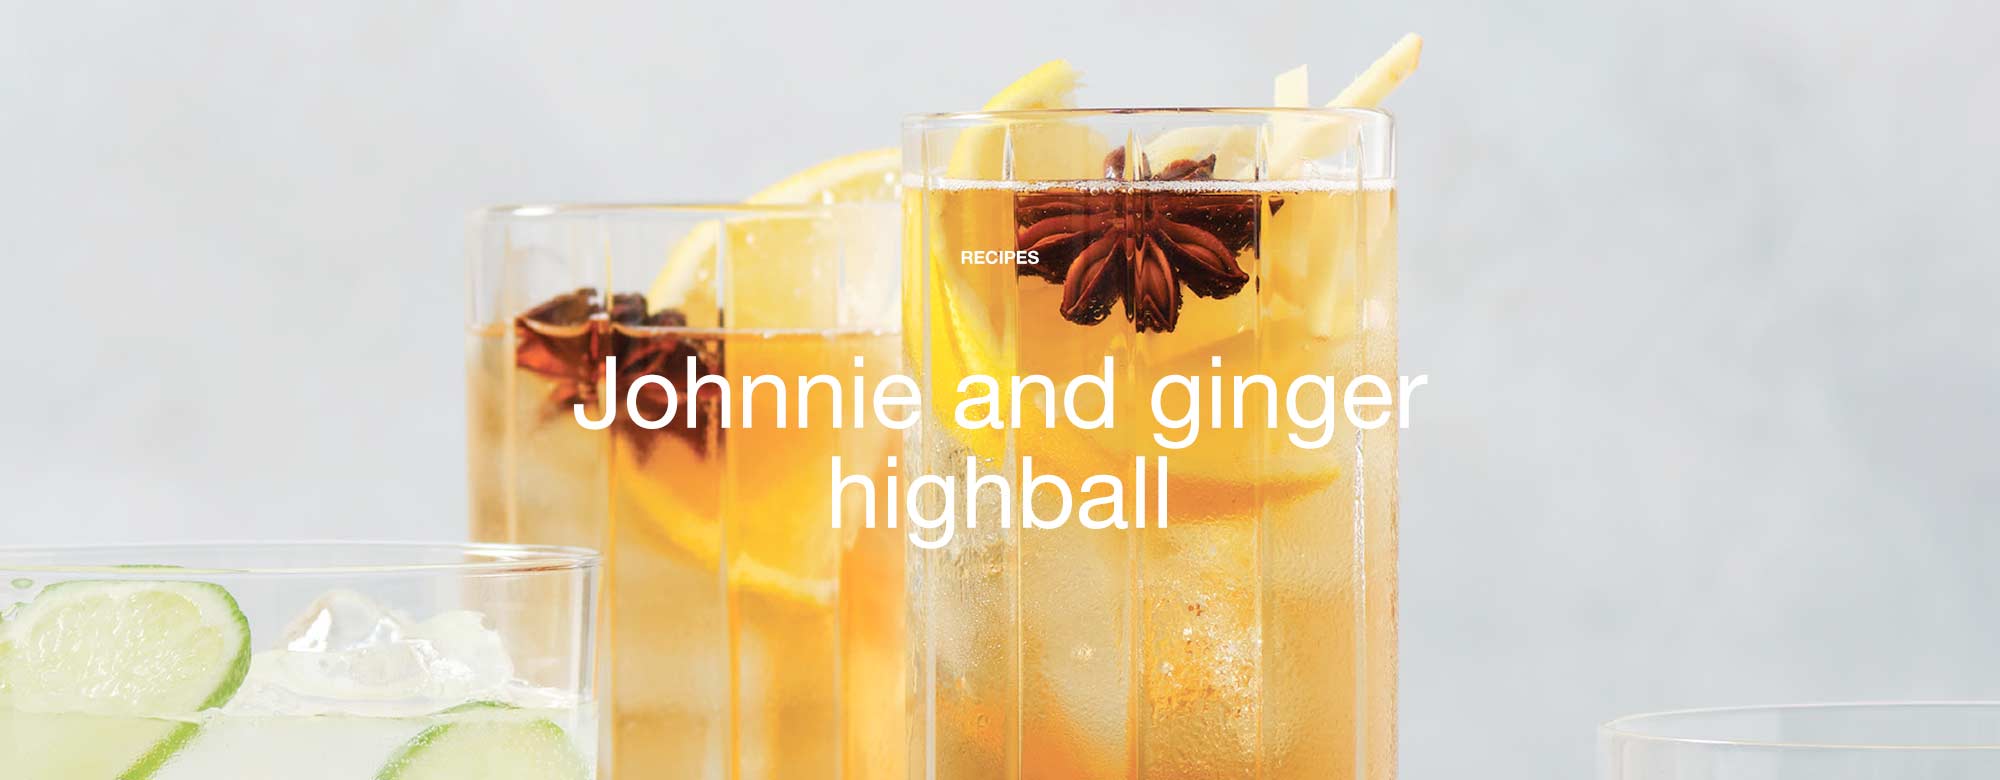 Johnnie and ginger highball